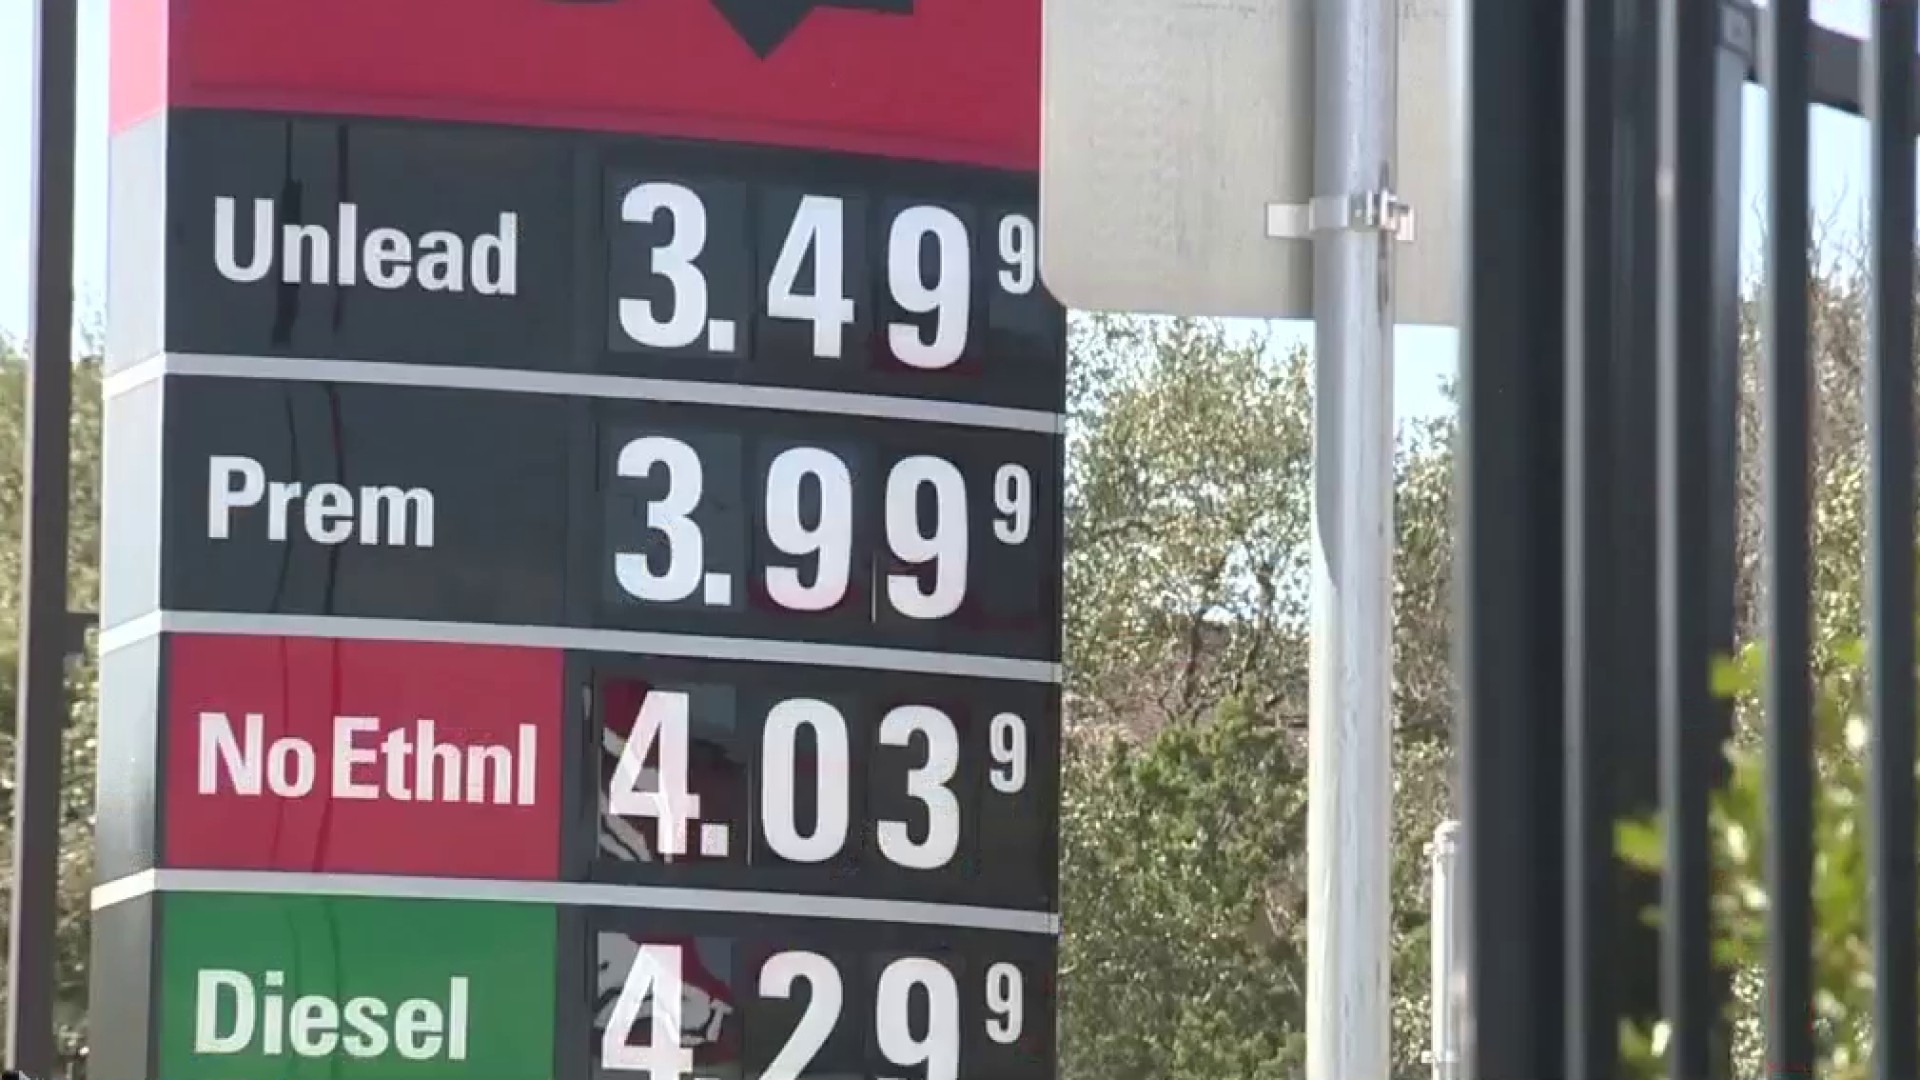 Gas prices are soaring. Here's how to stretch your gallon and dollar.